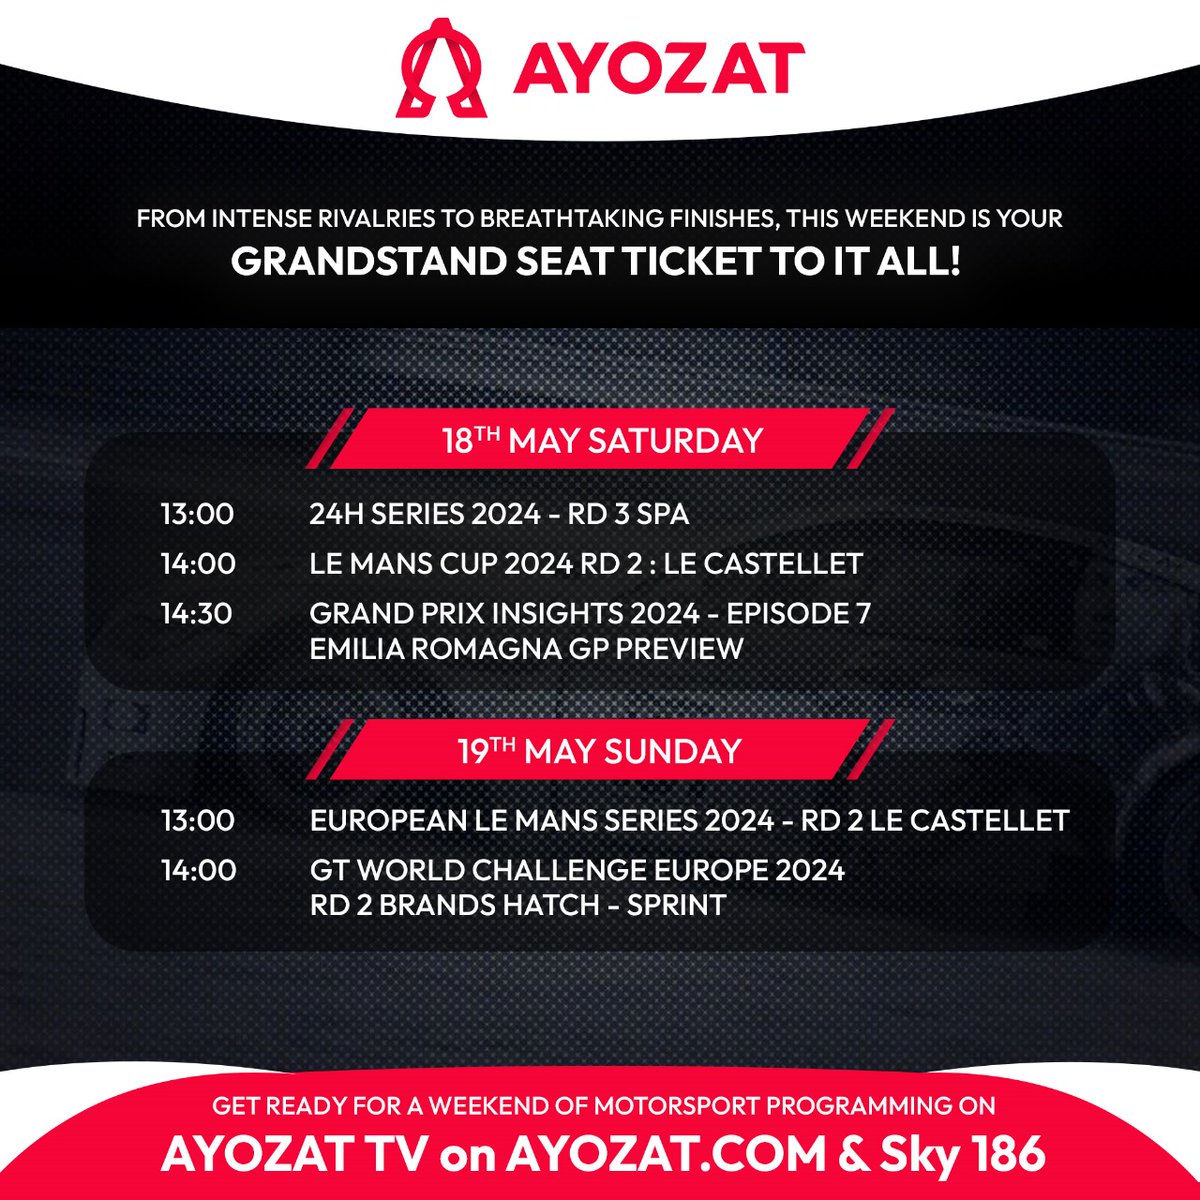 Check out our motorsport lineup starting from 1pm on AYOZAT TV at Sky 186 and ayozat.com! From high-speed races to thrilling showdowns, we've got your weekend covered with non-stop action! Don't miss a single lap!
#motorsport #cars #racing #action #weekendracing